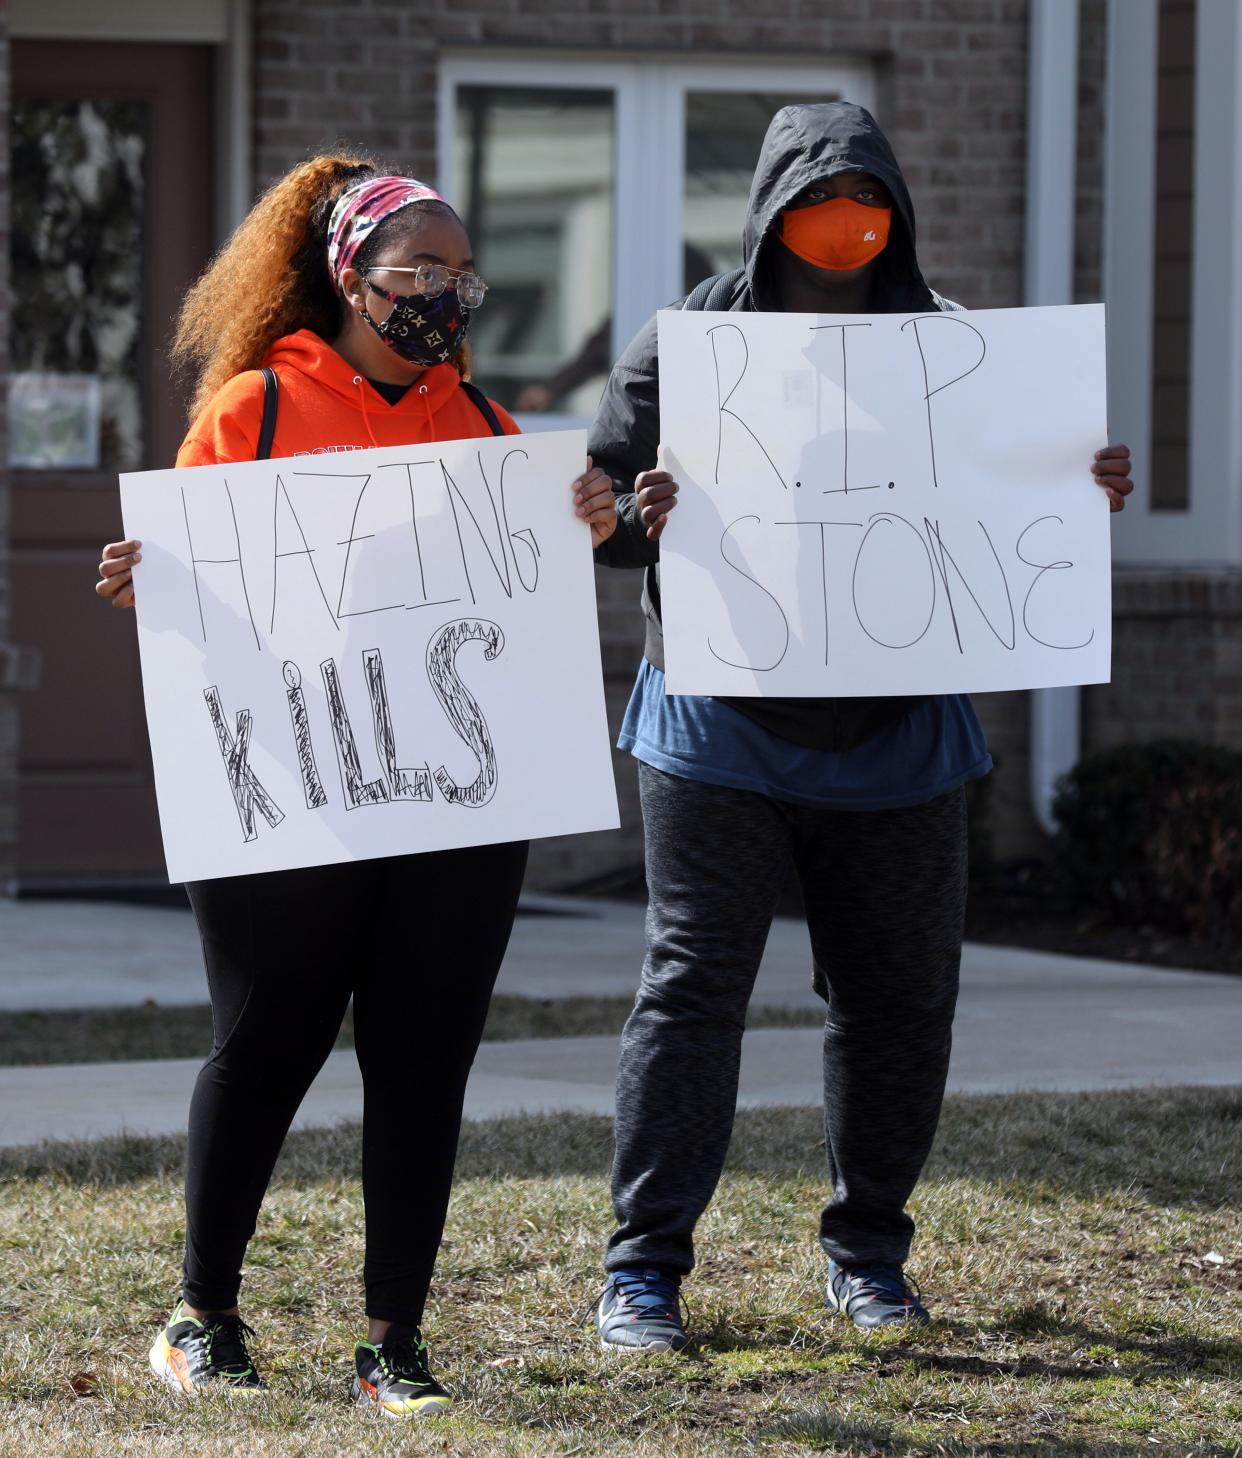 BGSU students hold signs near the Pi Kappa Alpha fraternity house at Bowling Green State University during a protest on Tuesday, March 9, 2021.